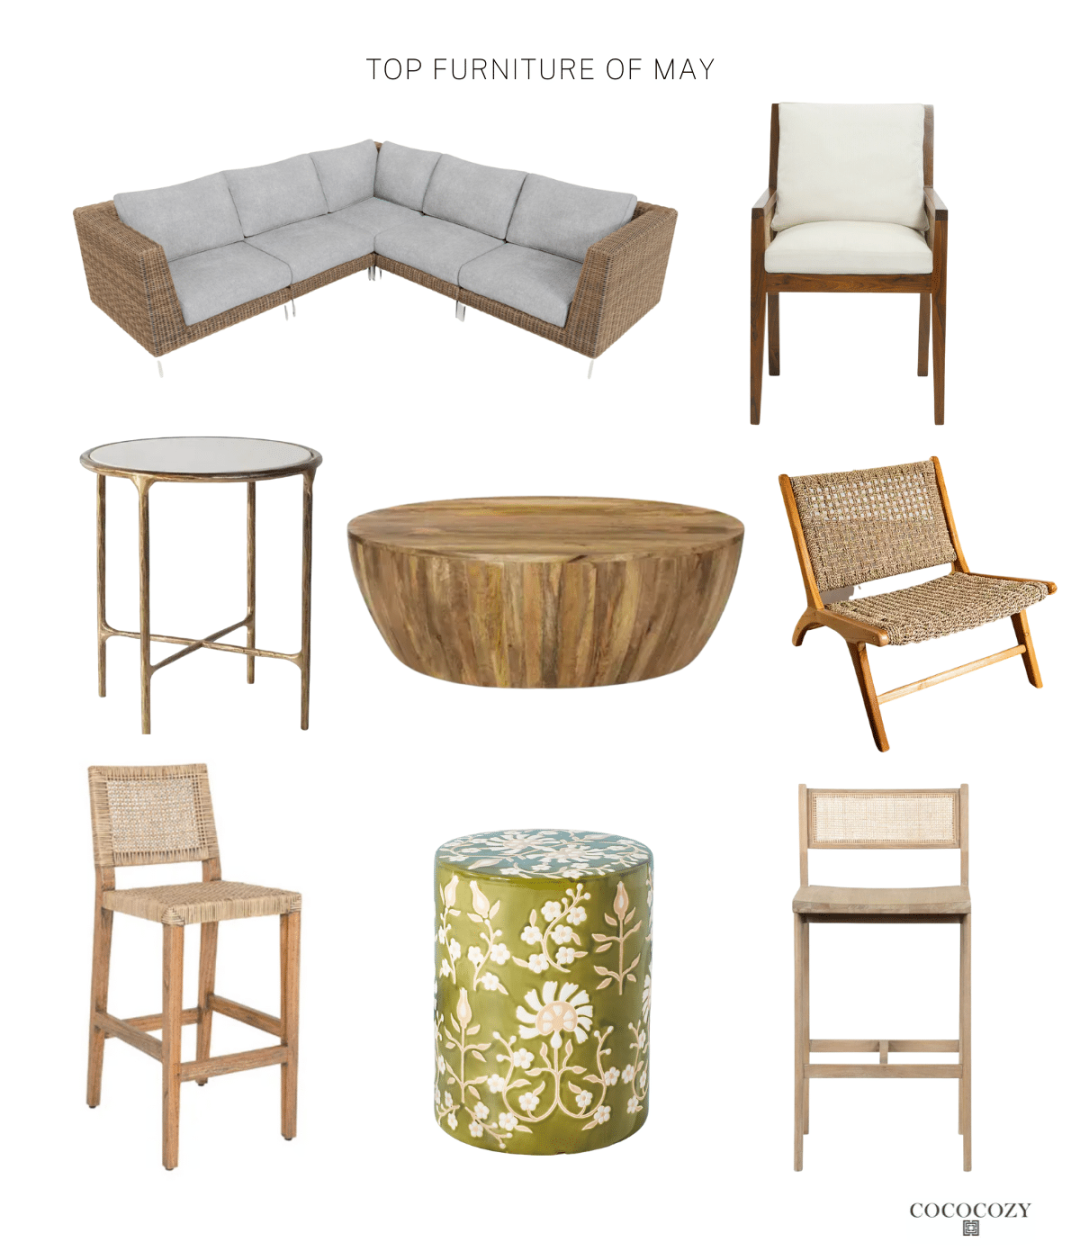 Key Essentials:  Best-Selling Furniture and Home Decor For May